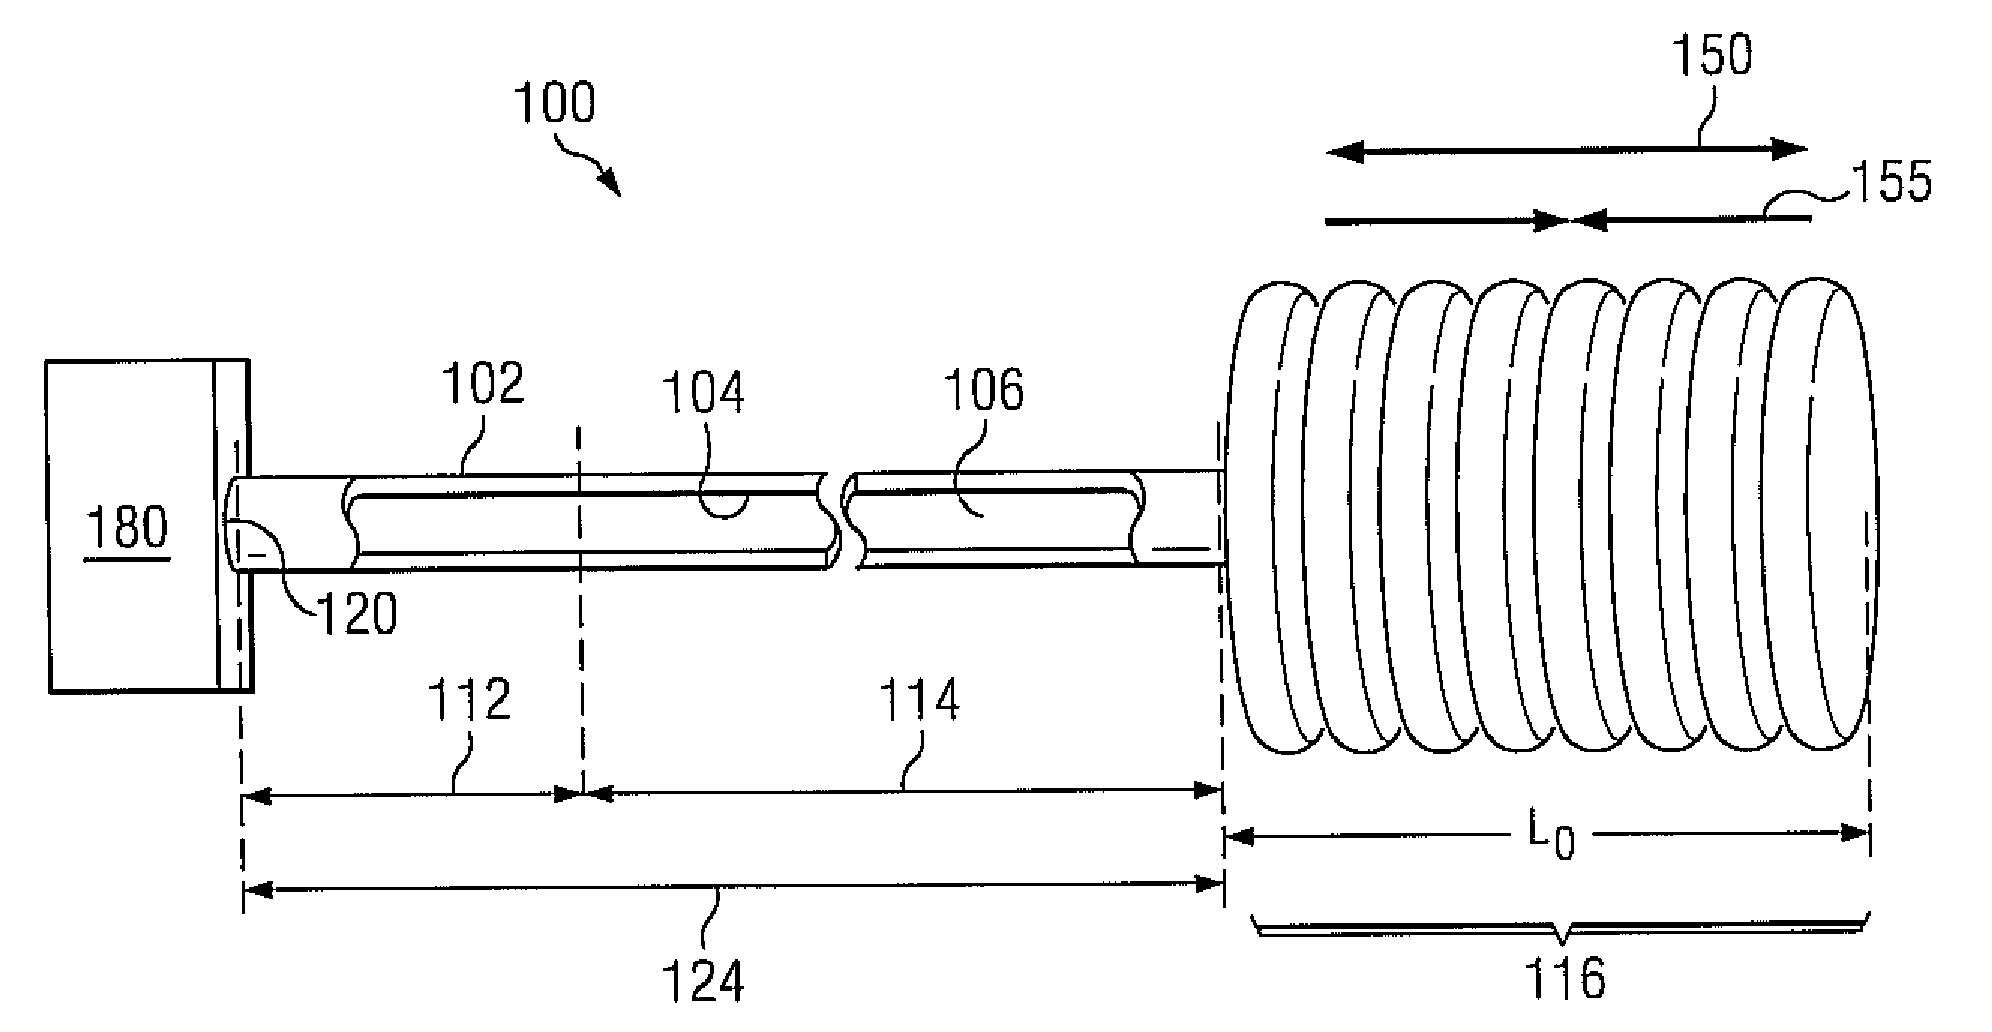 Modified heat pipe for phase change cooling of electronic devices